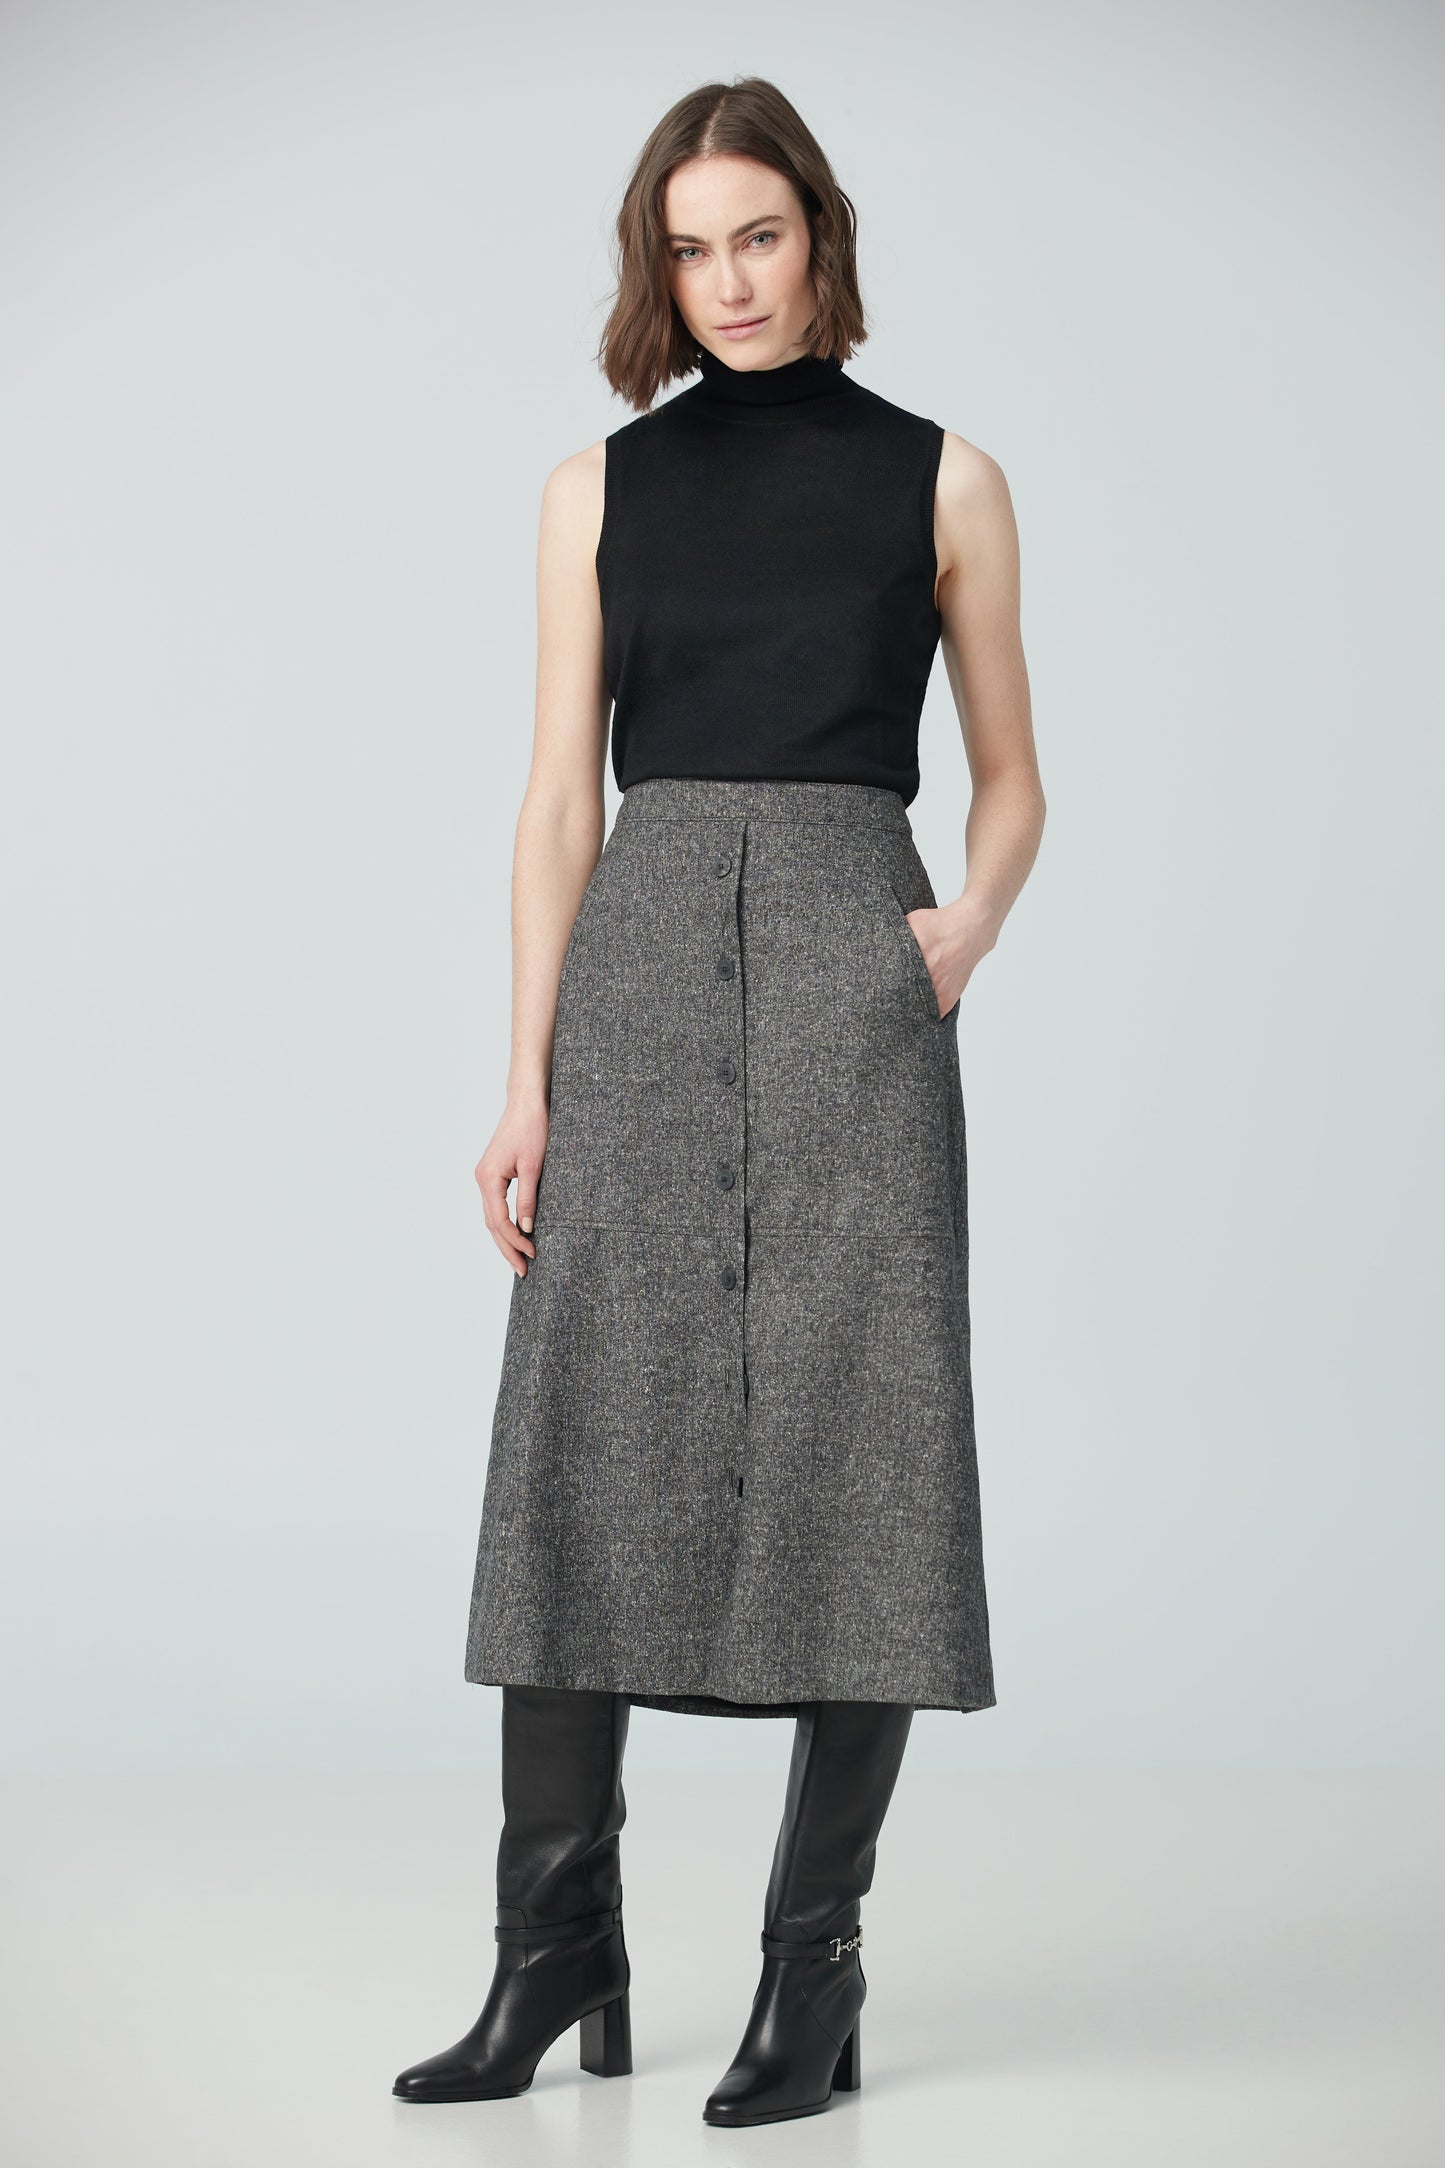 A-line skirt with buttons